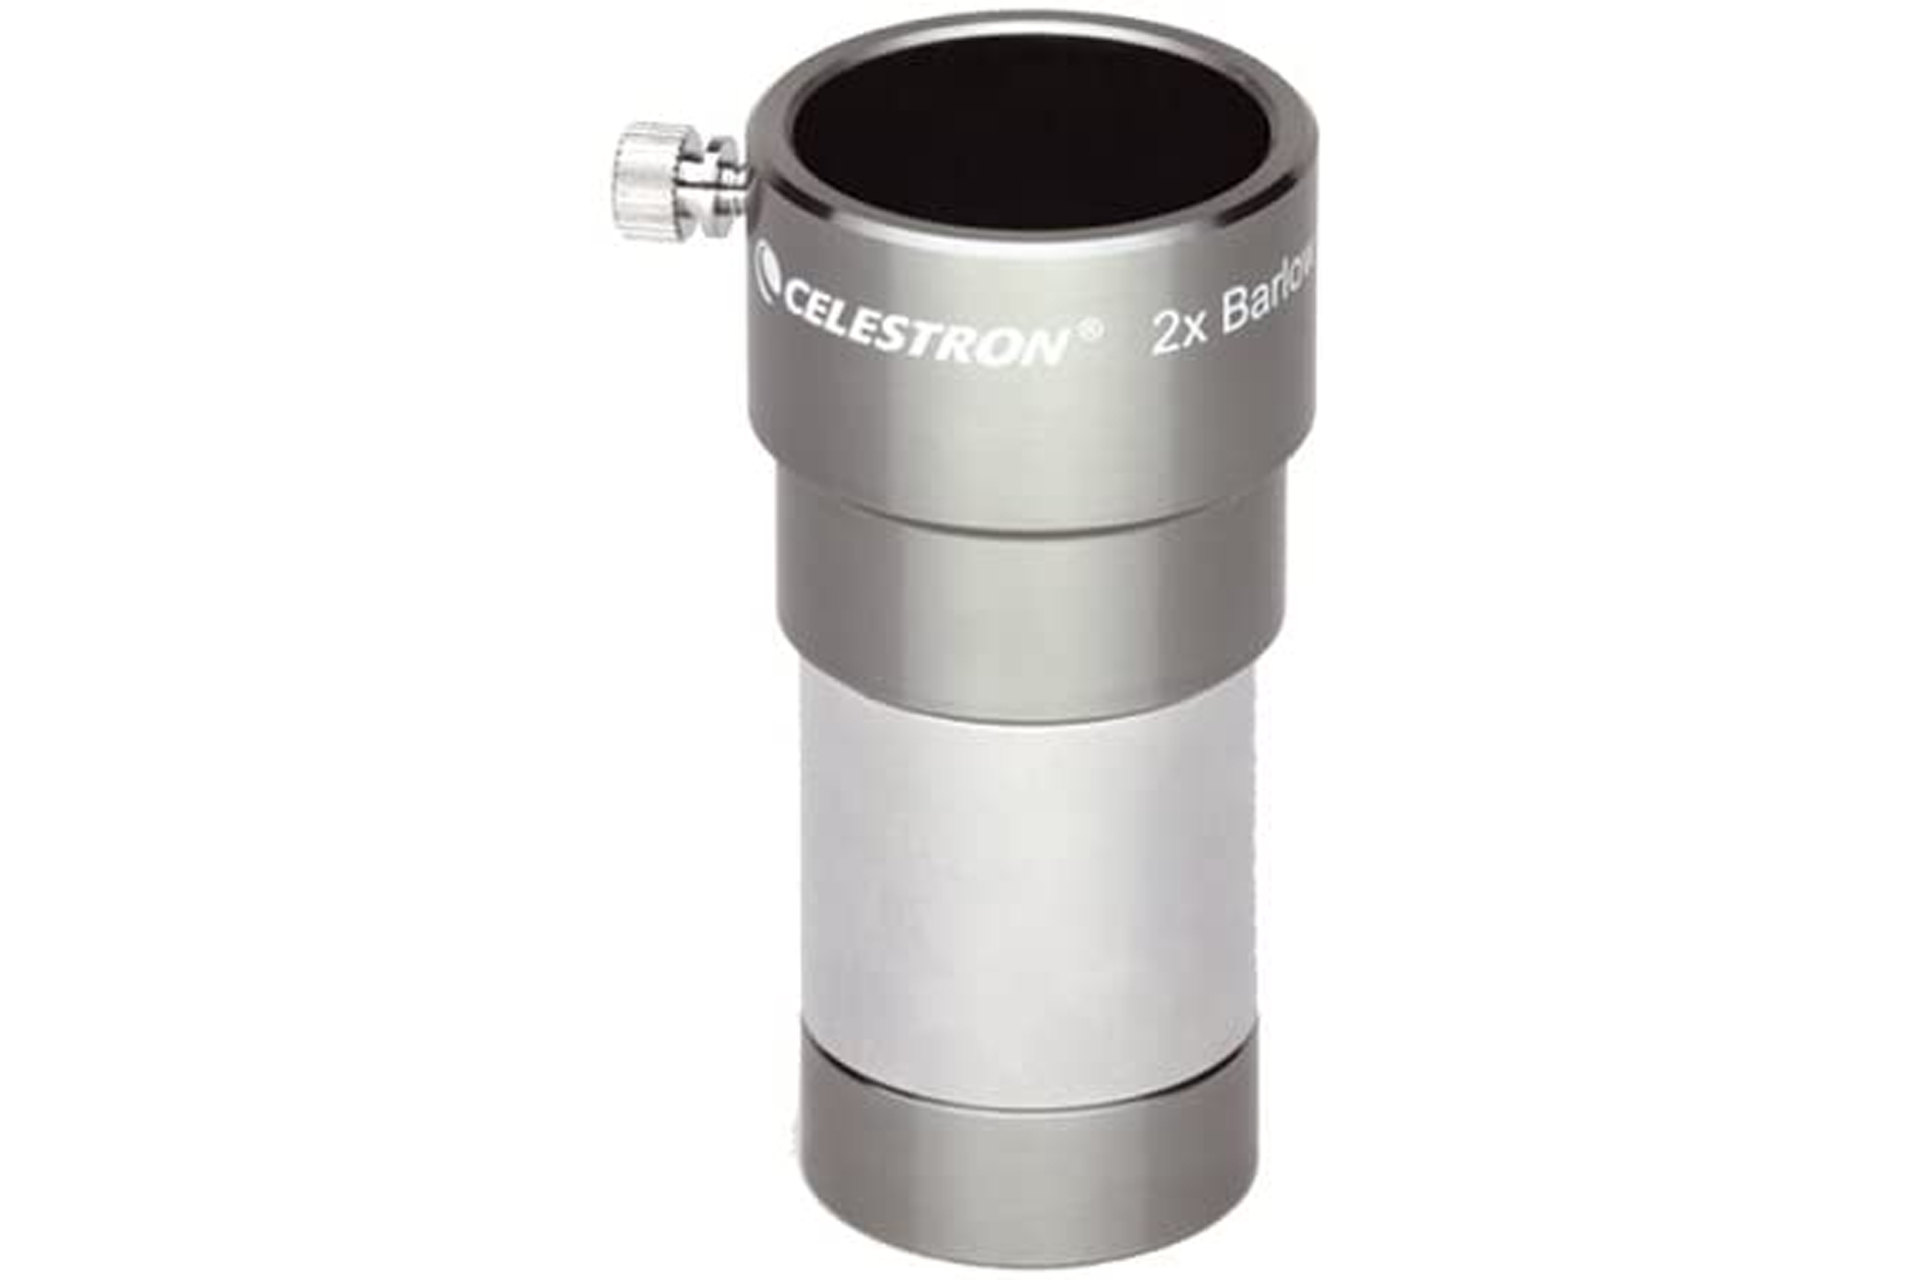 Celestron's 2x 1.25-inch Omni Barlow lens is a good option to get more out of your telescope view.